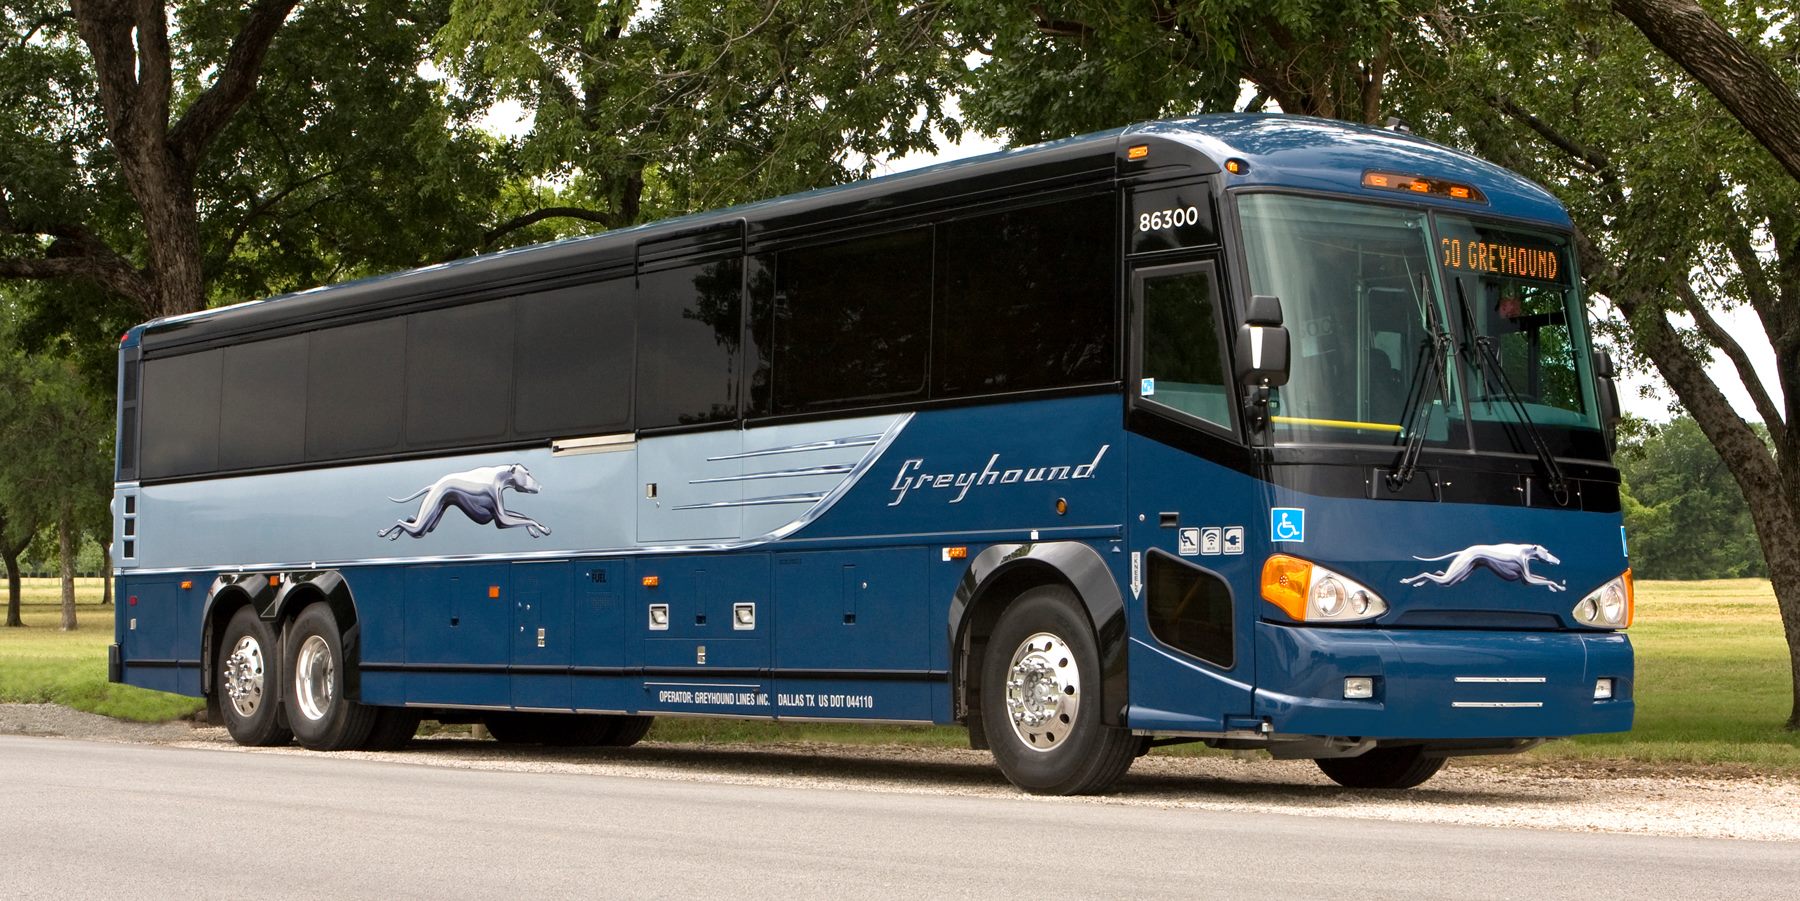 How do you view Greyhound bus schedules?